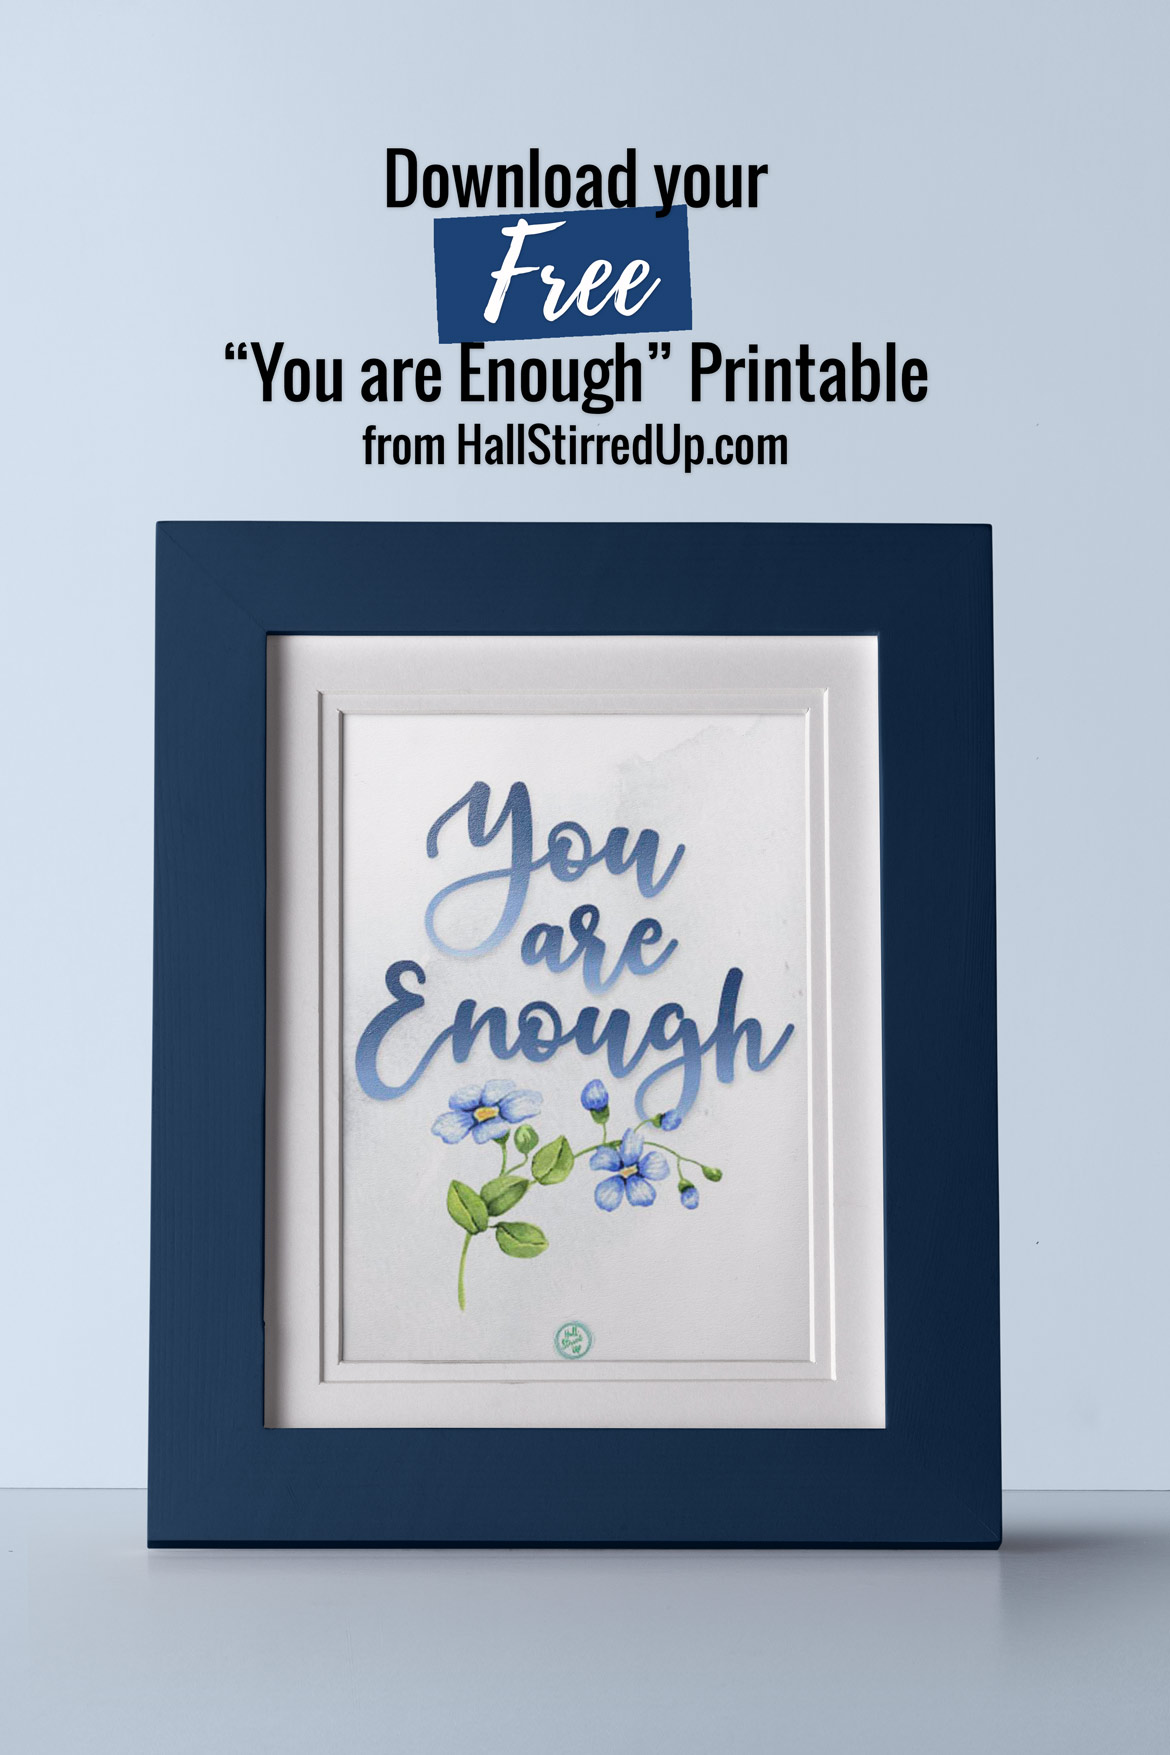 Kick your critic to the curb Includes a free You are Enough printable